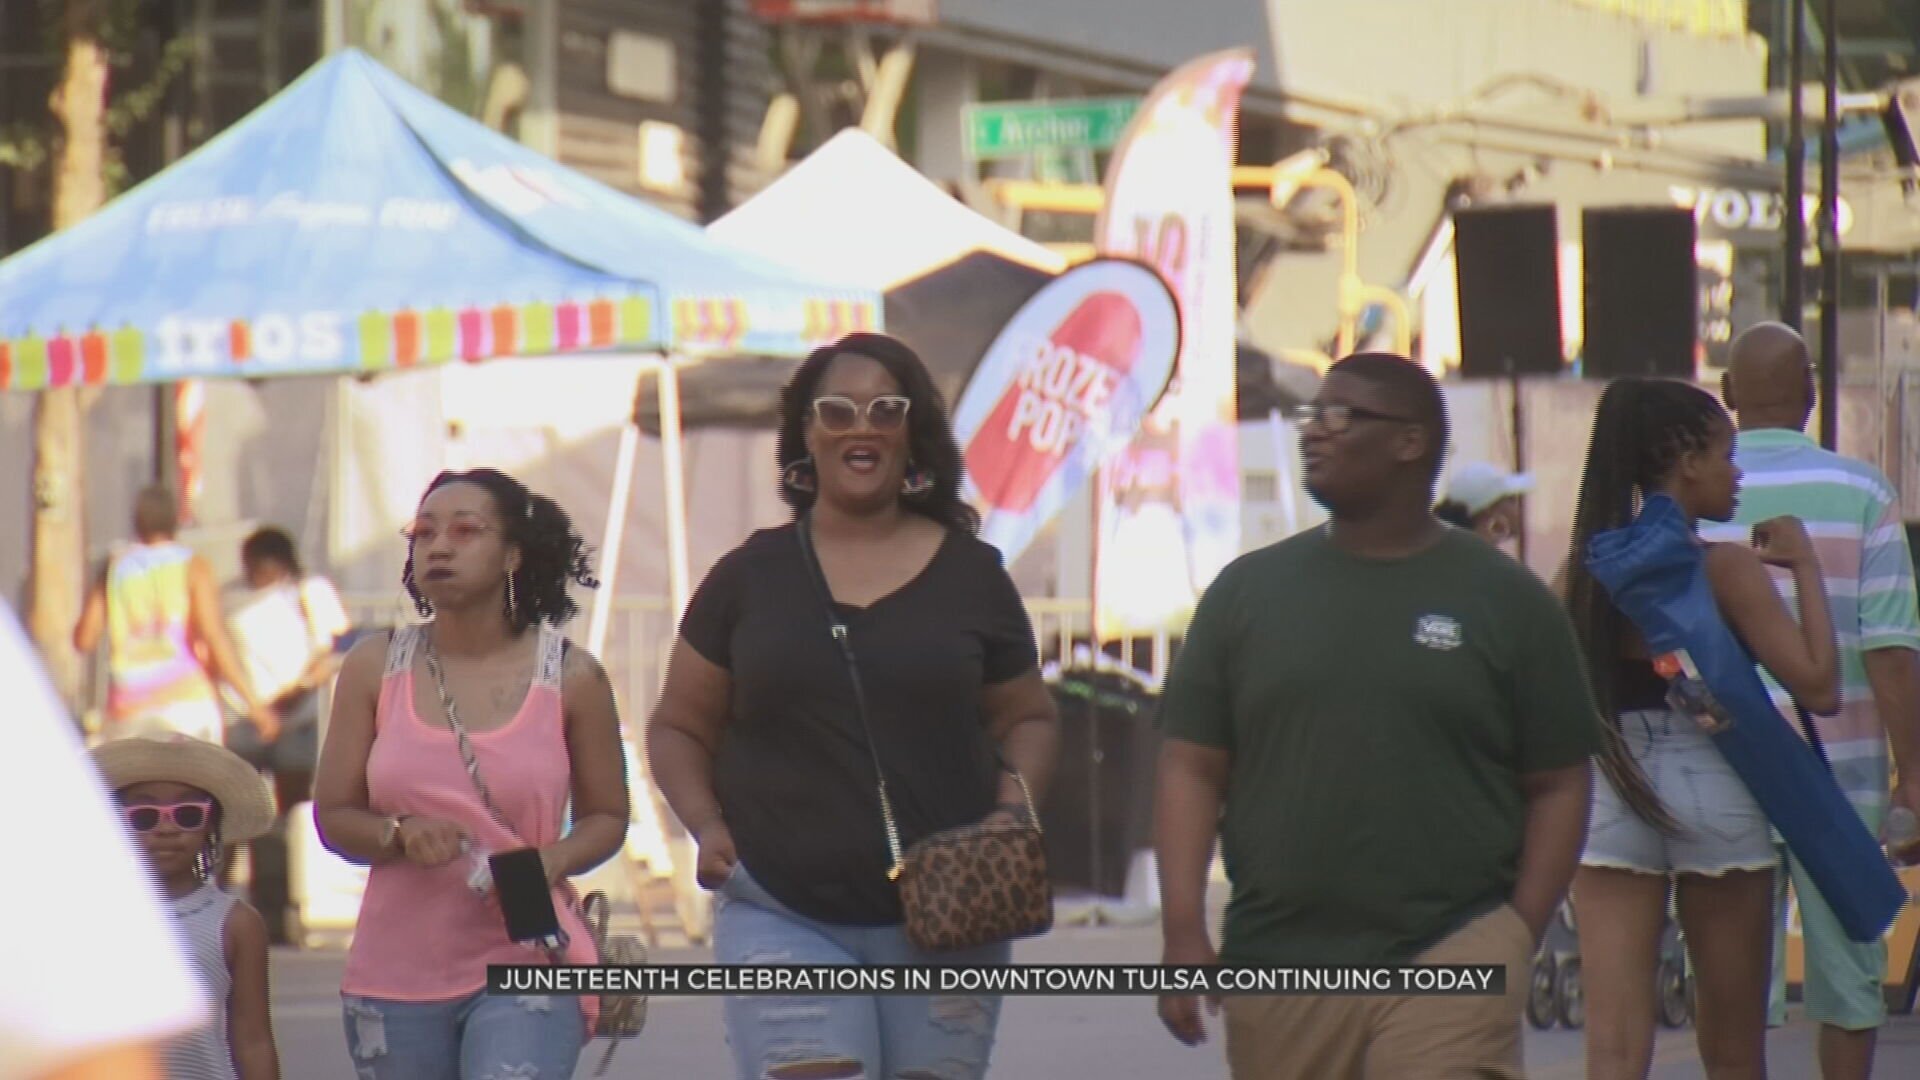 Full Day Of Festivities Lined Up To Celebrate Juneteenth In Tulsa 